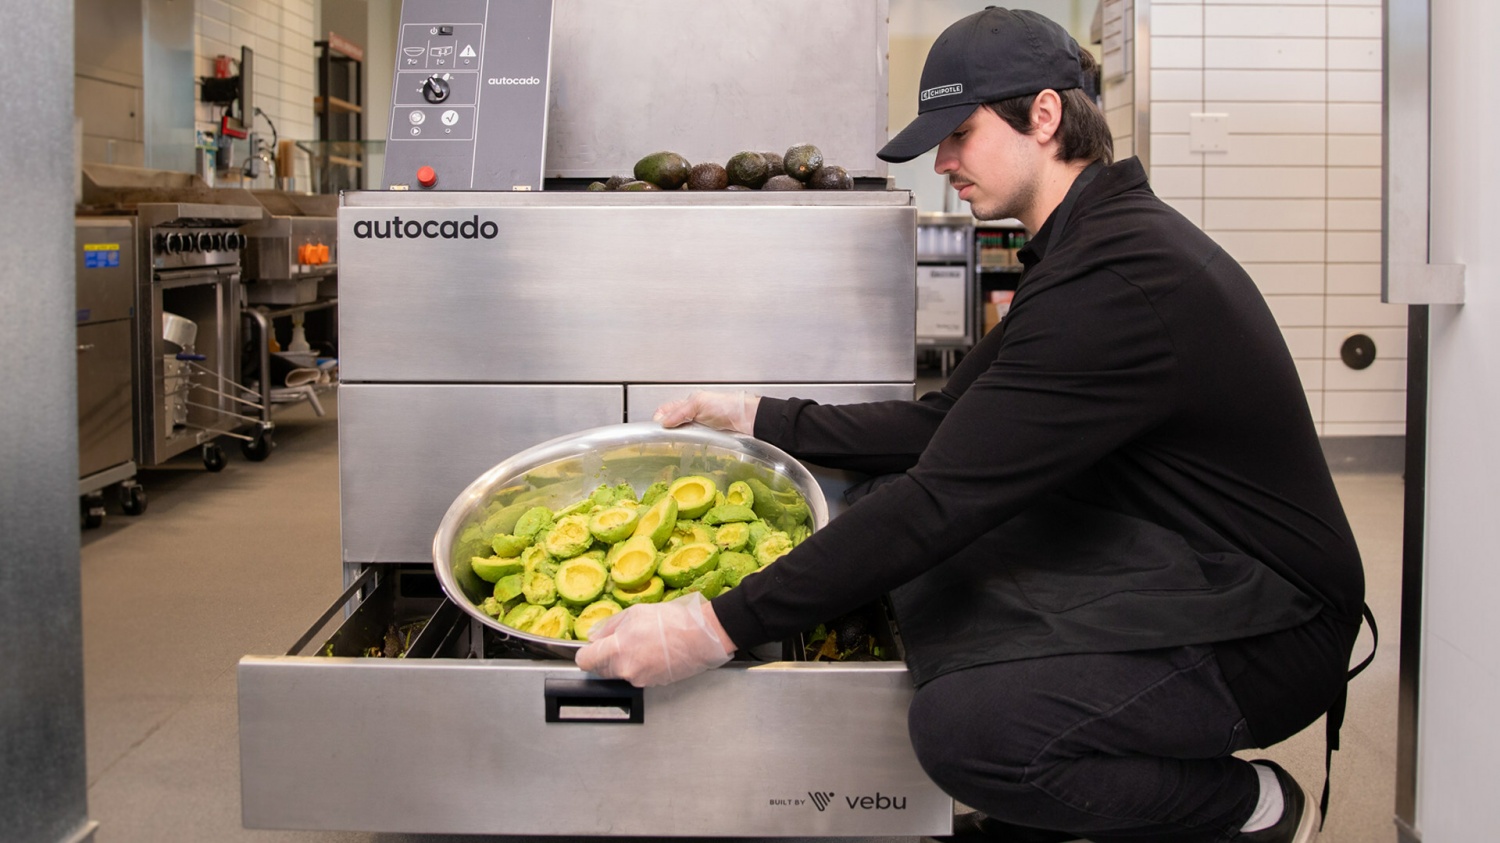 Chipotle Unveils ‘Autocado’ Robot Developed by Vebu That Peels and Cores Avocados for Guacamole